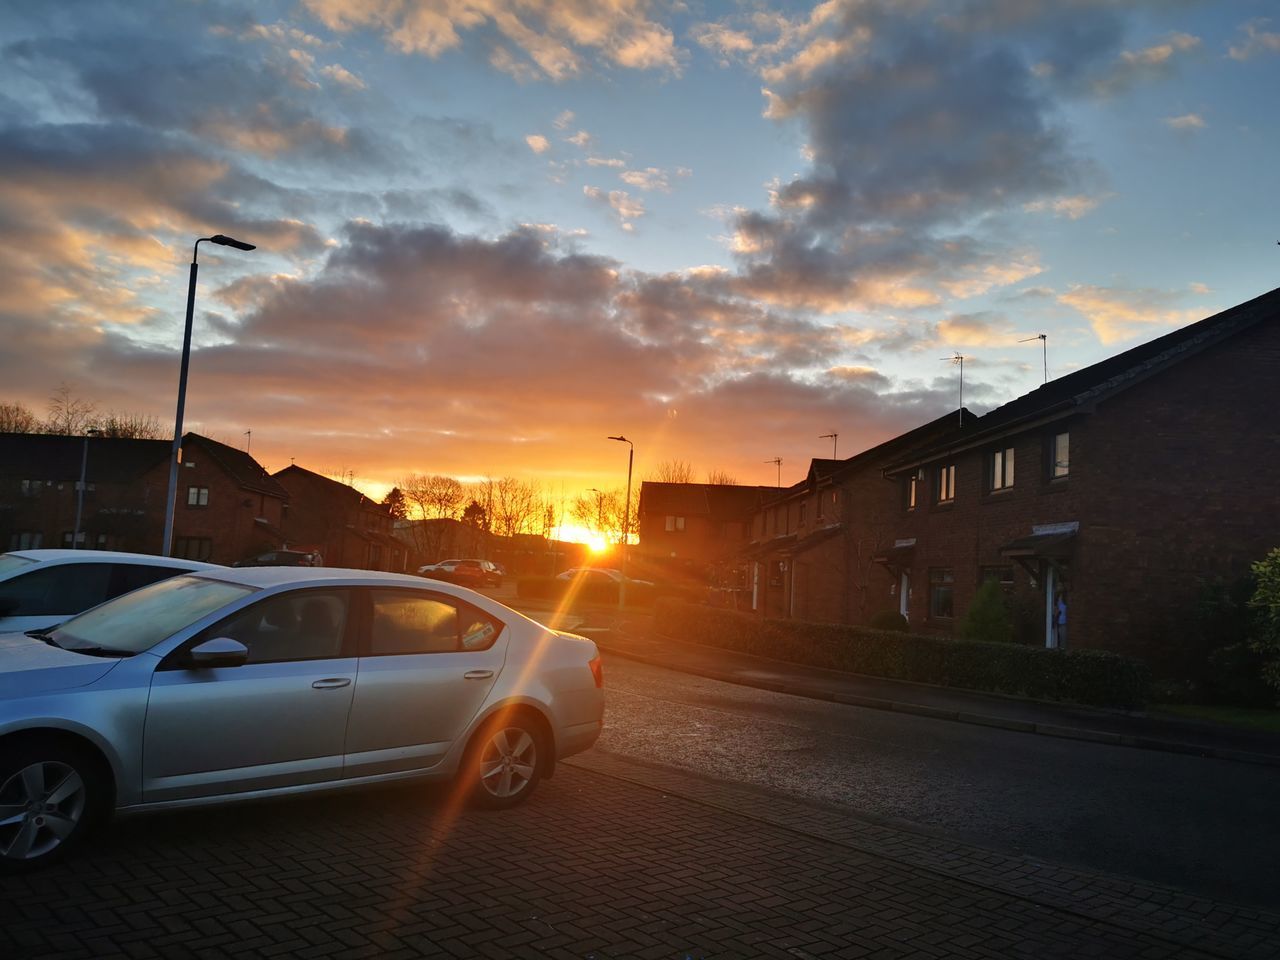 CARS ON ROAD AGAINST SKY DURING SUNSET